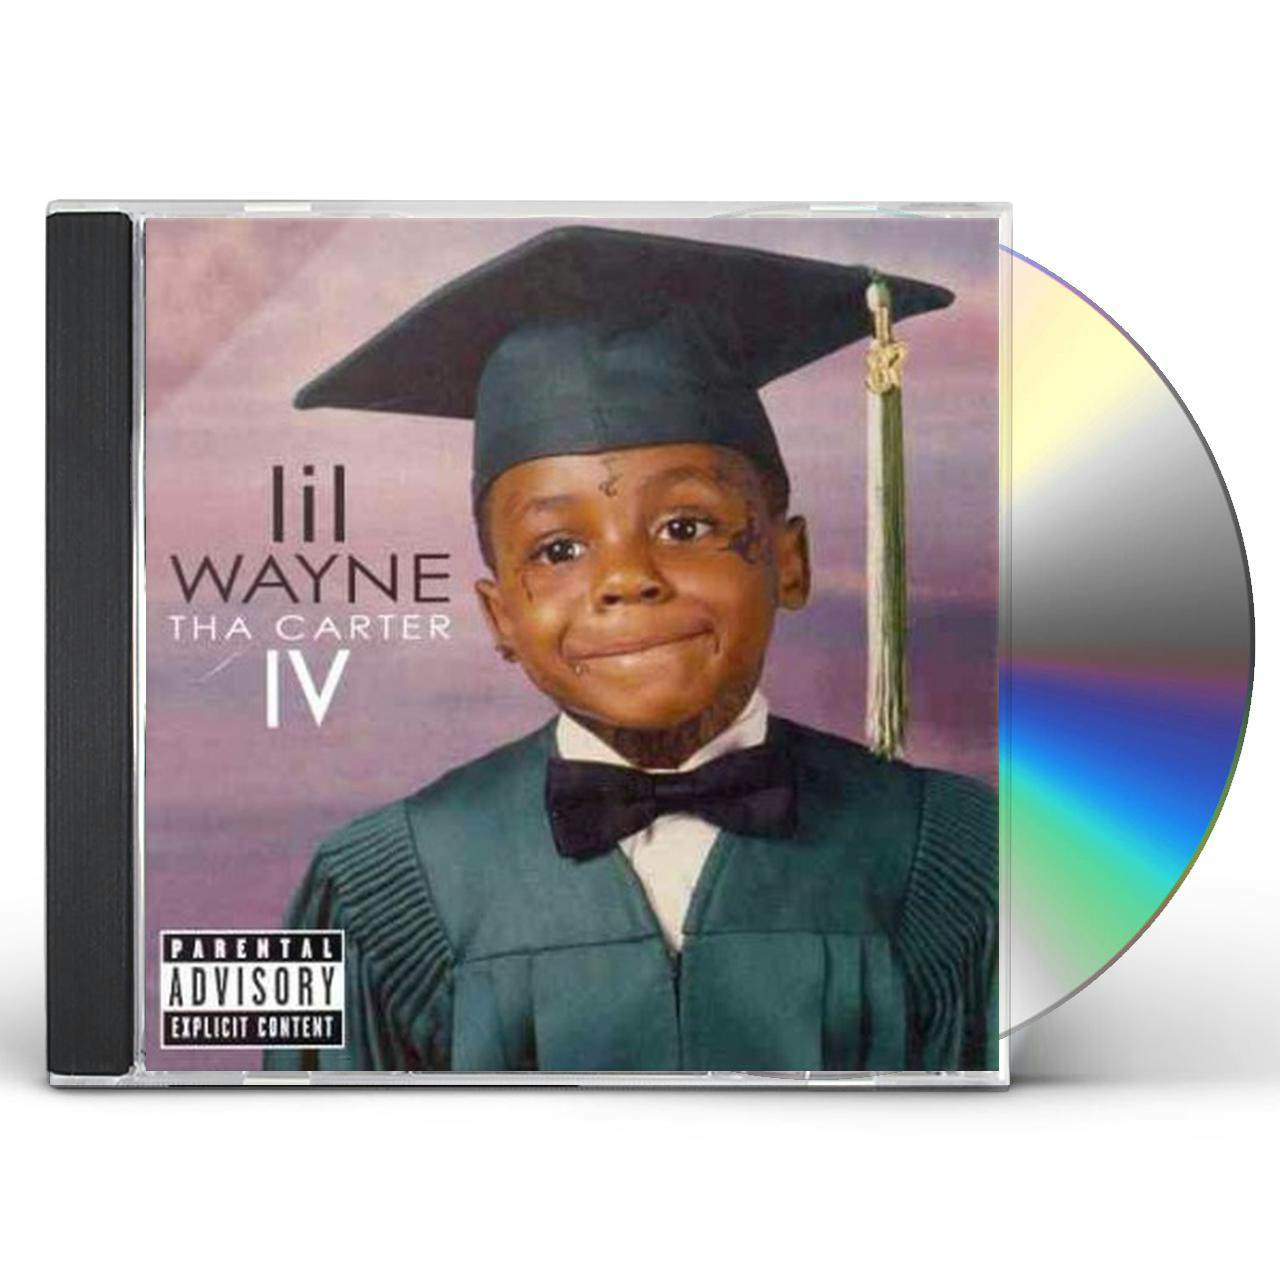 the carter 4 deluxe edition